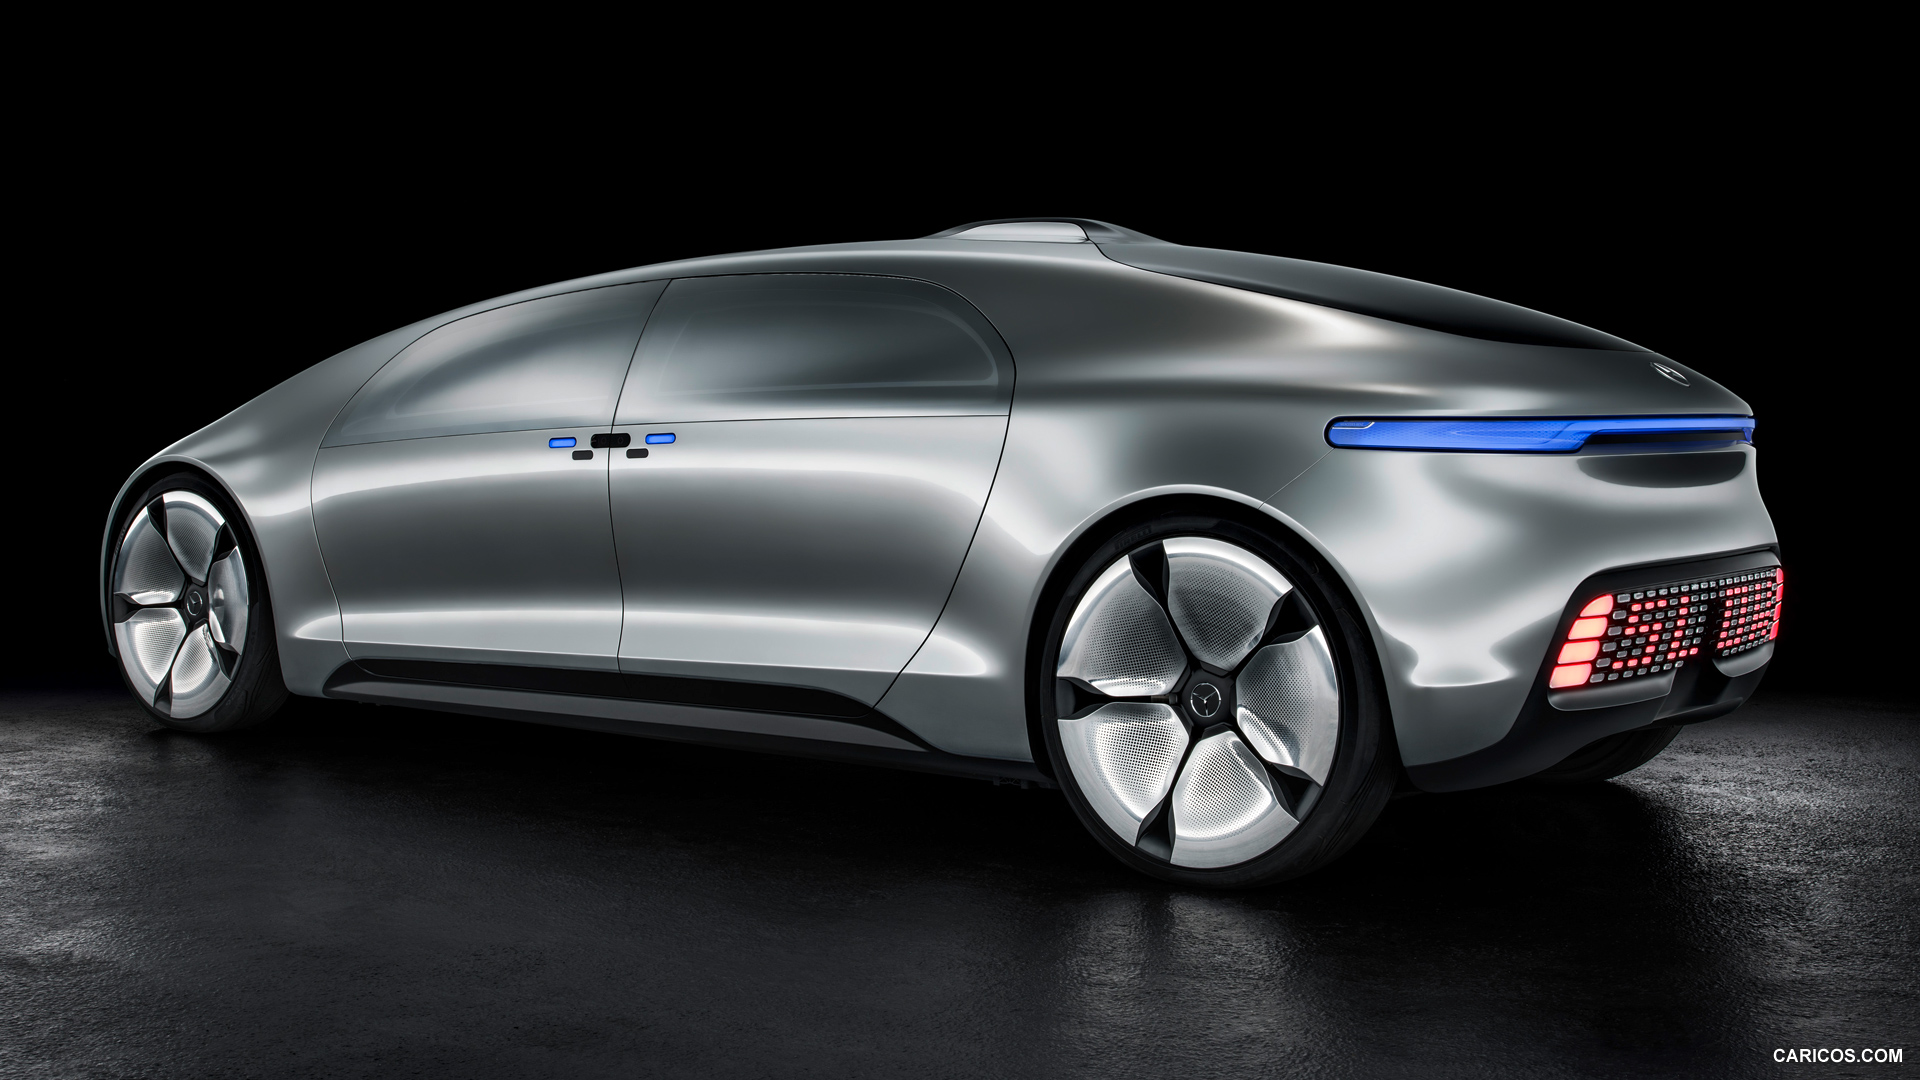 2015 Mercedes-Benz F 015 Luxury in Motion Concept  - Side, #47 of 92